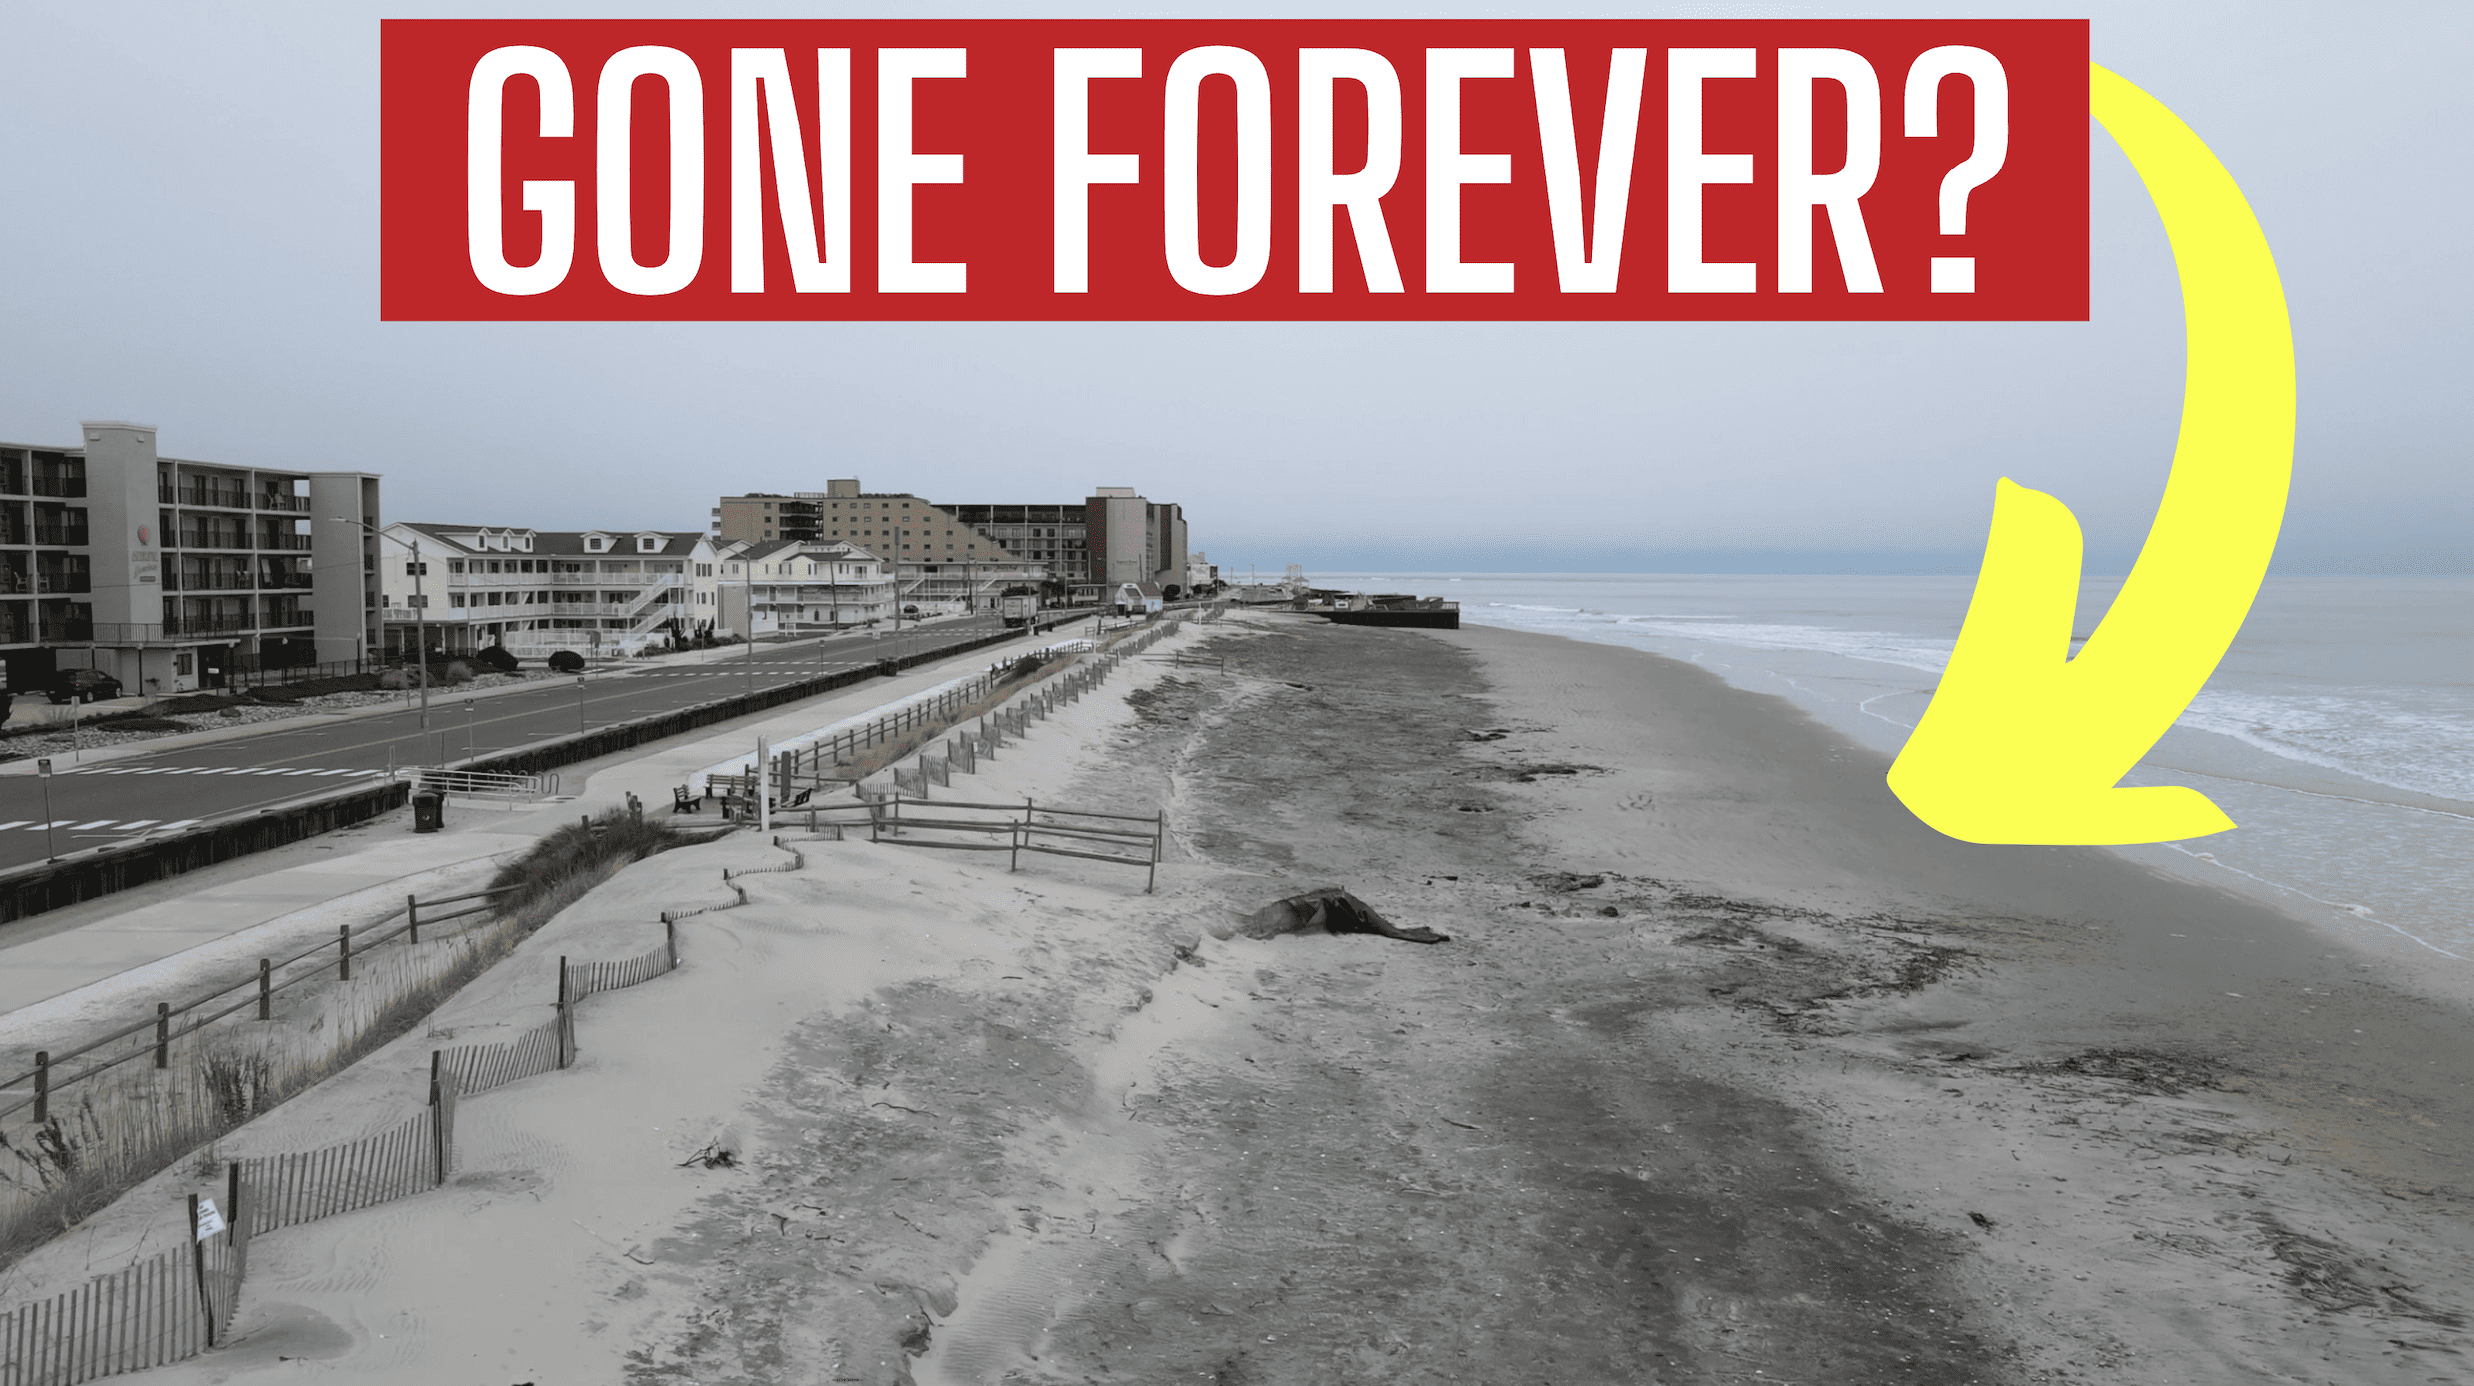 Are North Wildwood's Beaches Gone Forever?